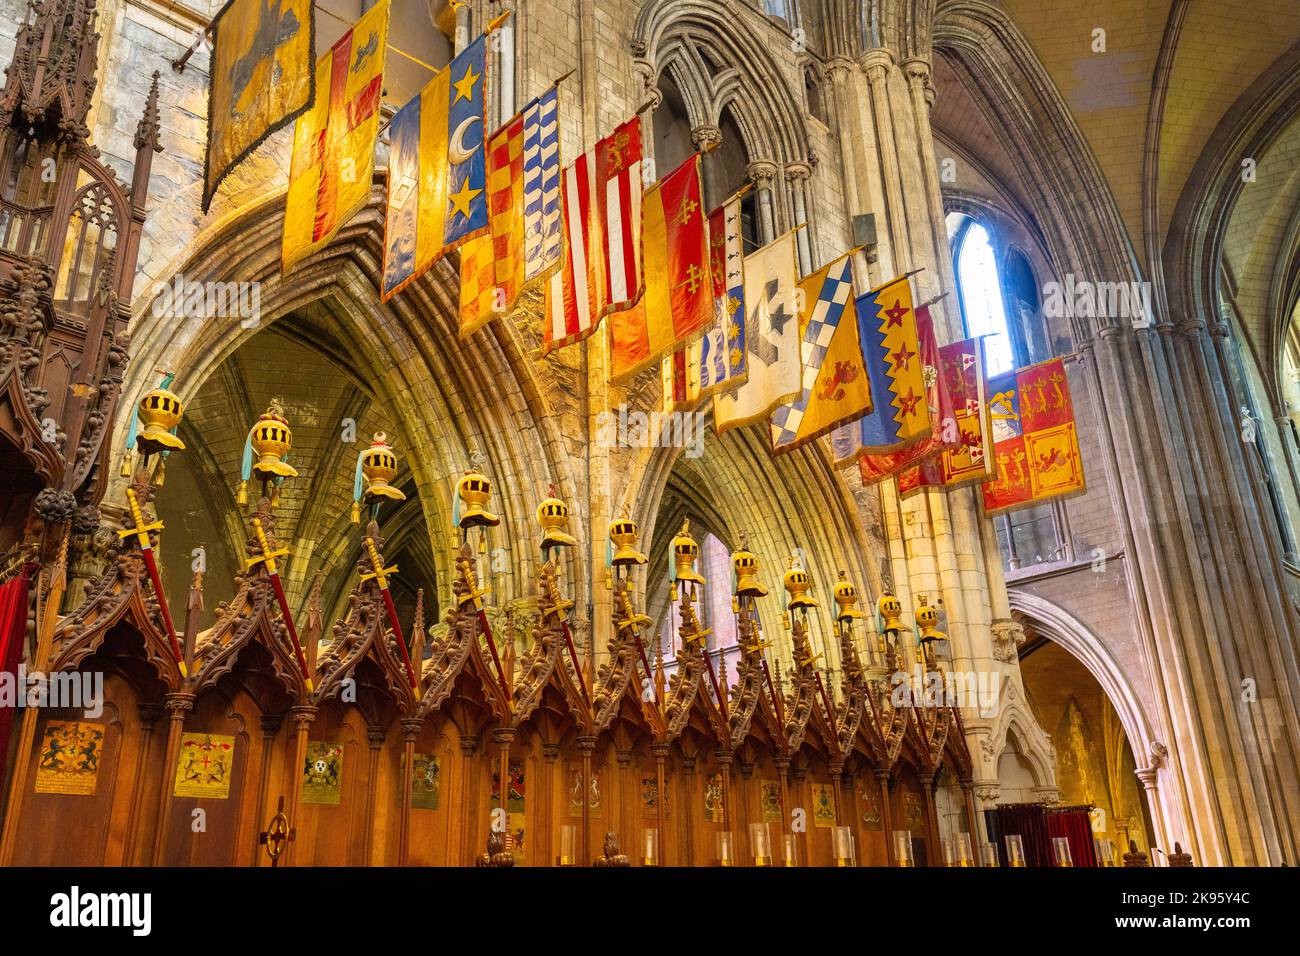 Ireland Dublin St Patrick's Cathedral Church of Ireland was Catholic founded 1191 Gothic choir stalls Knights of St Patrick heraldic banners flags Stock Photo